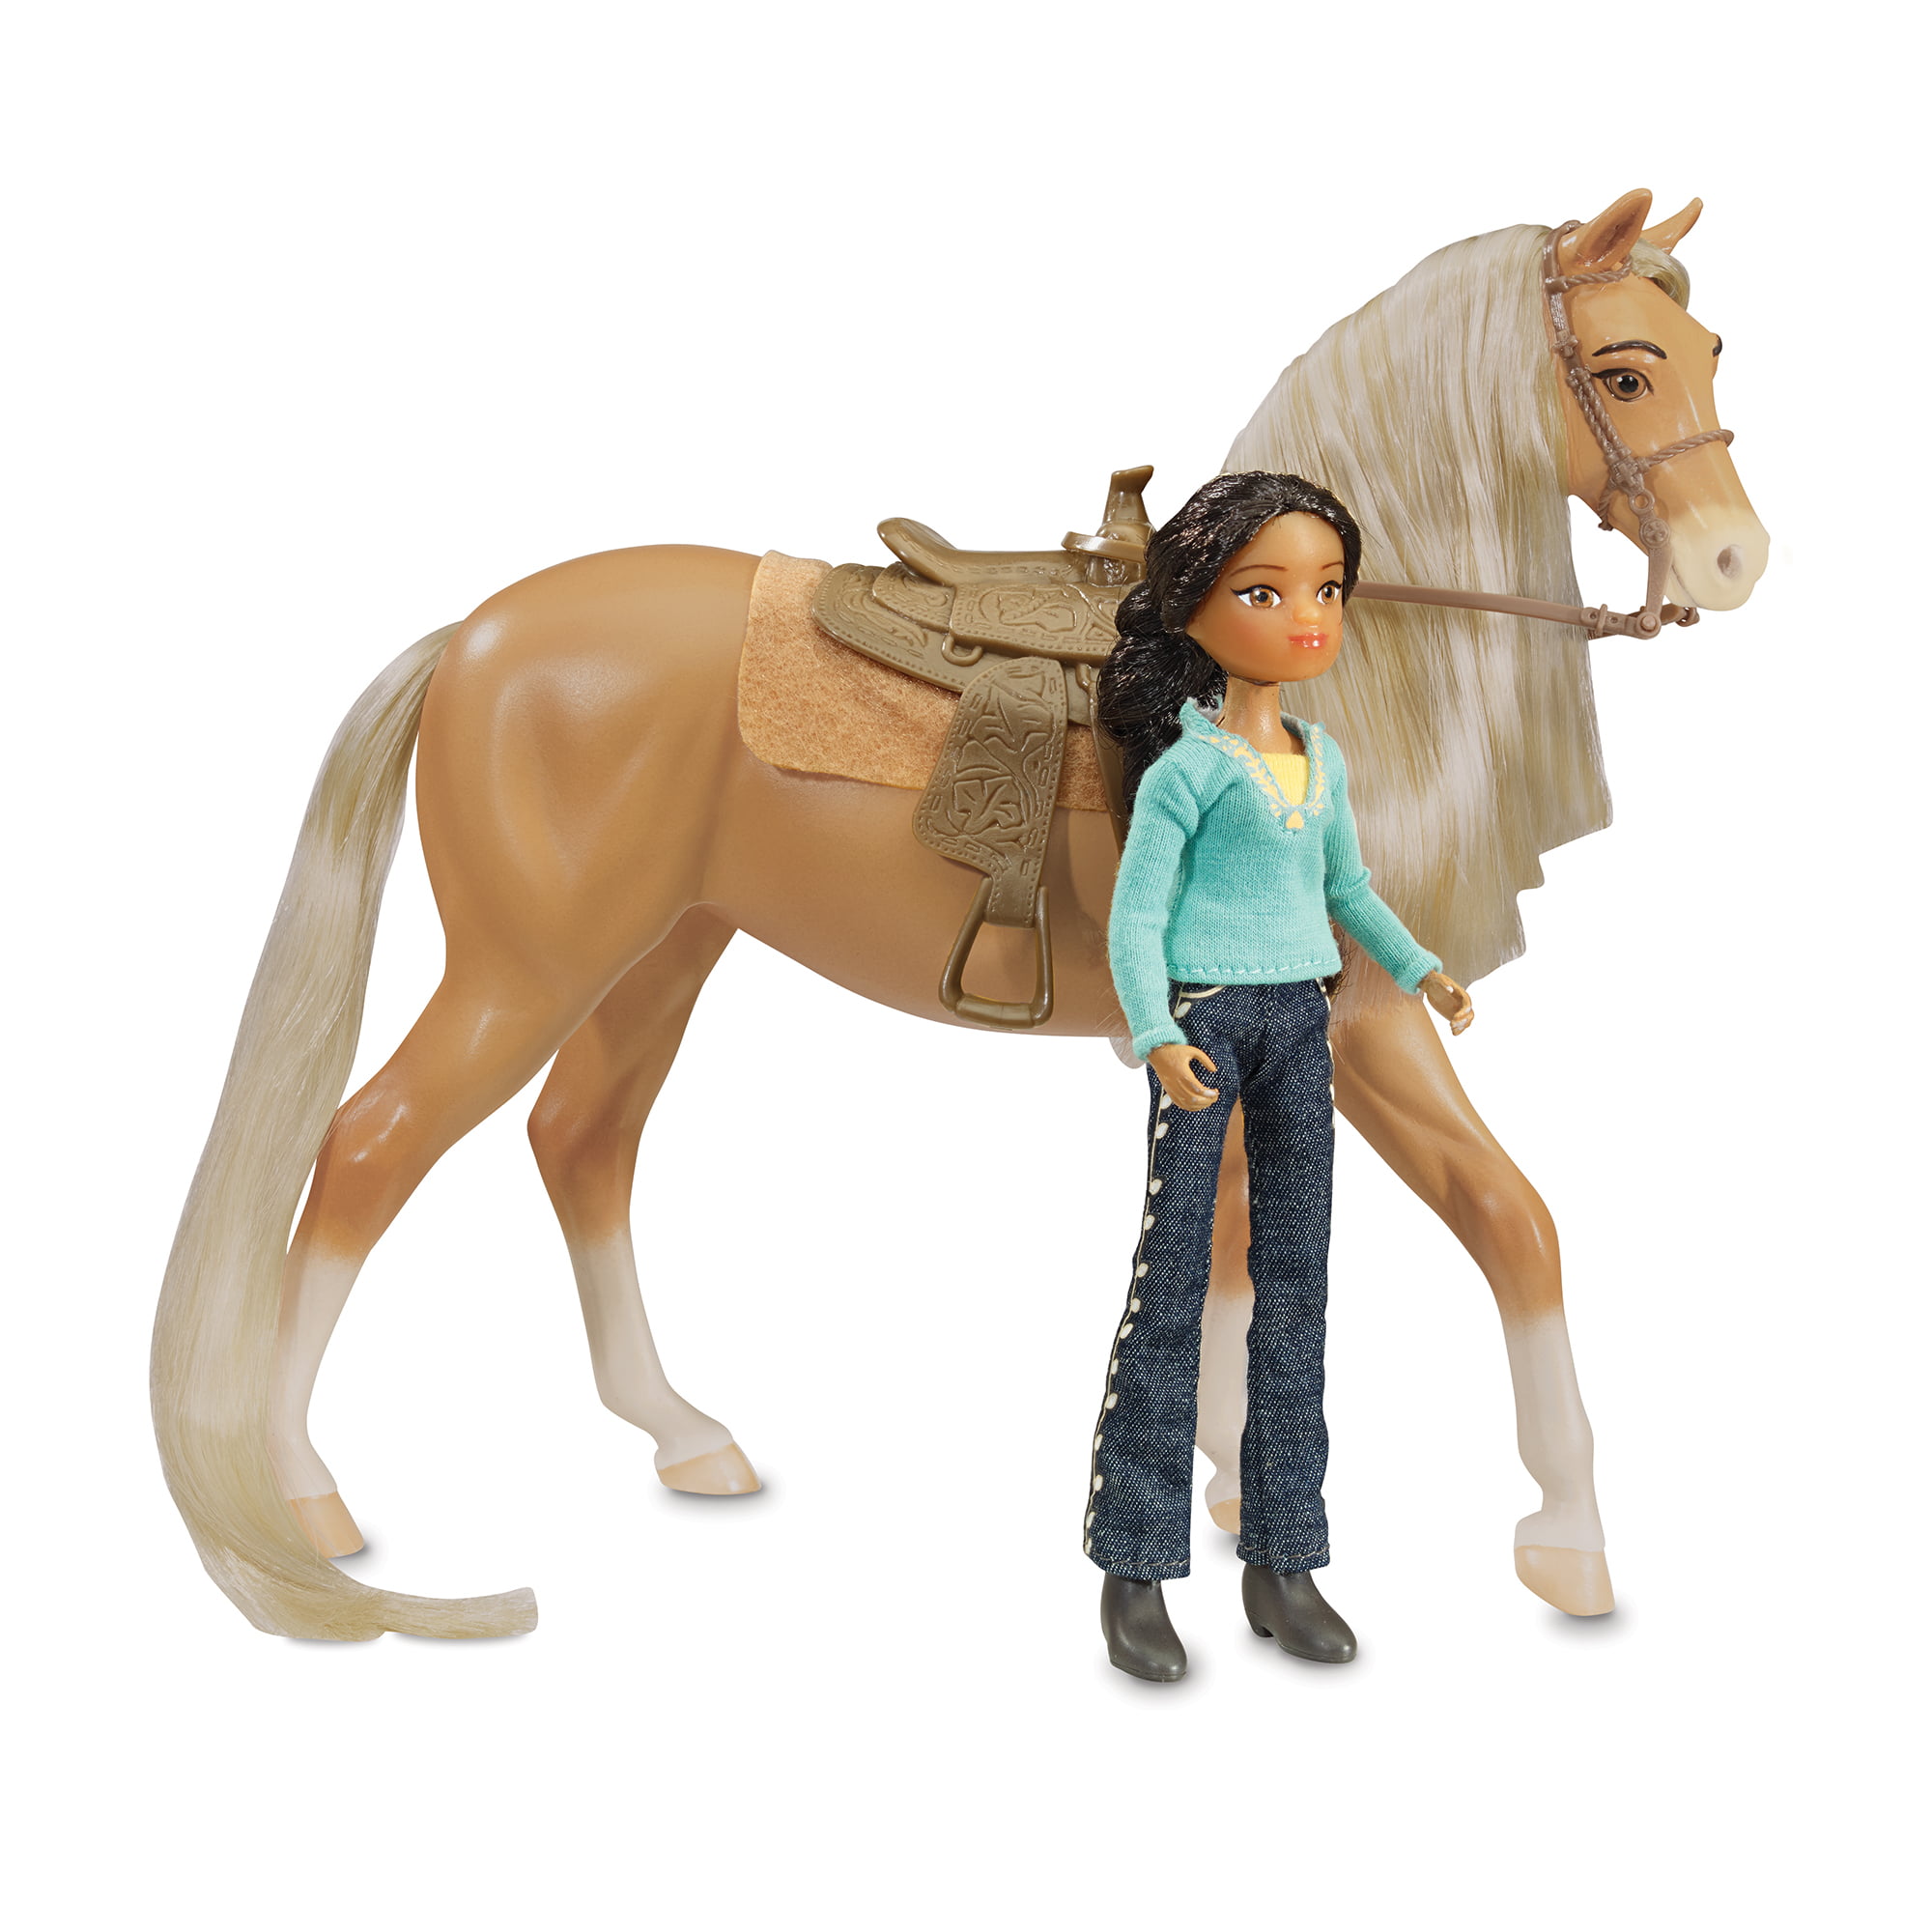 ✨ Dreamworks Spirit Riding Free Pru and Chica Linda Horse & Doll Play Set NEW ✨ 